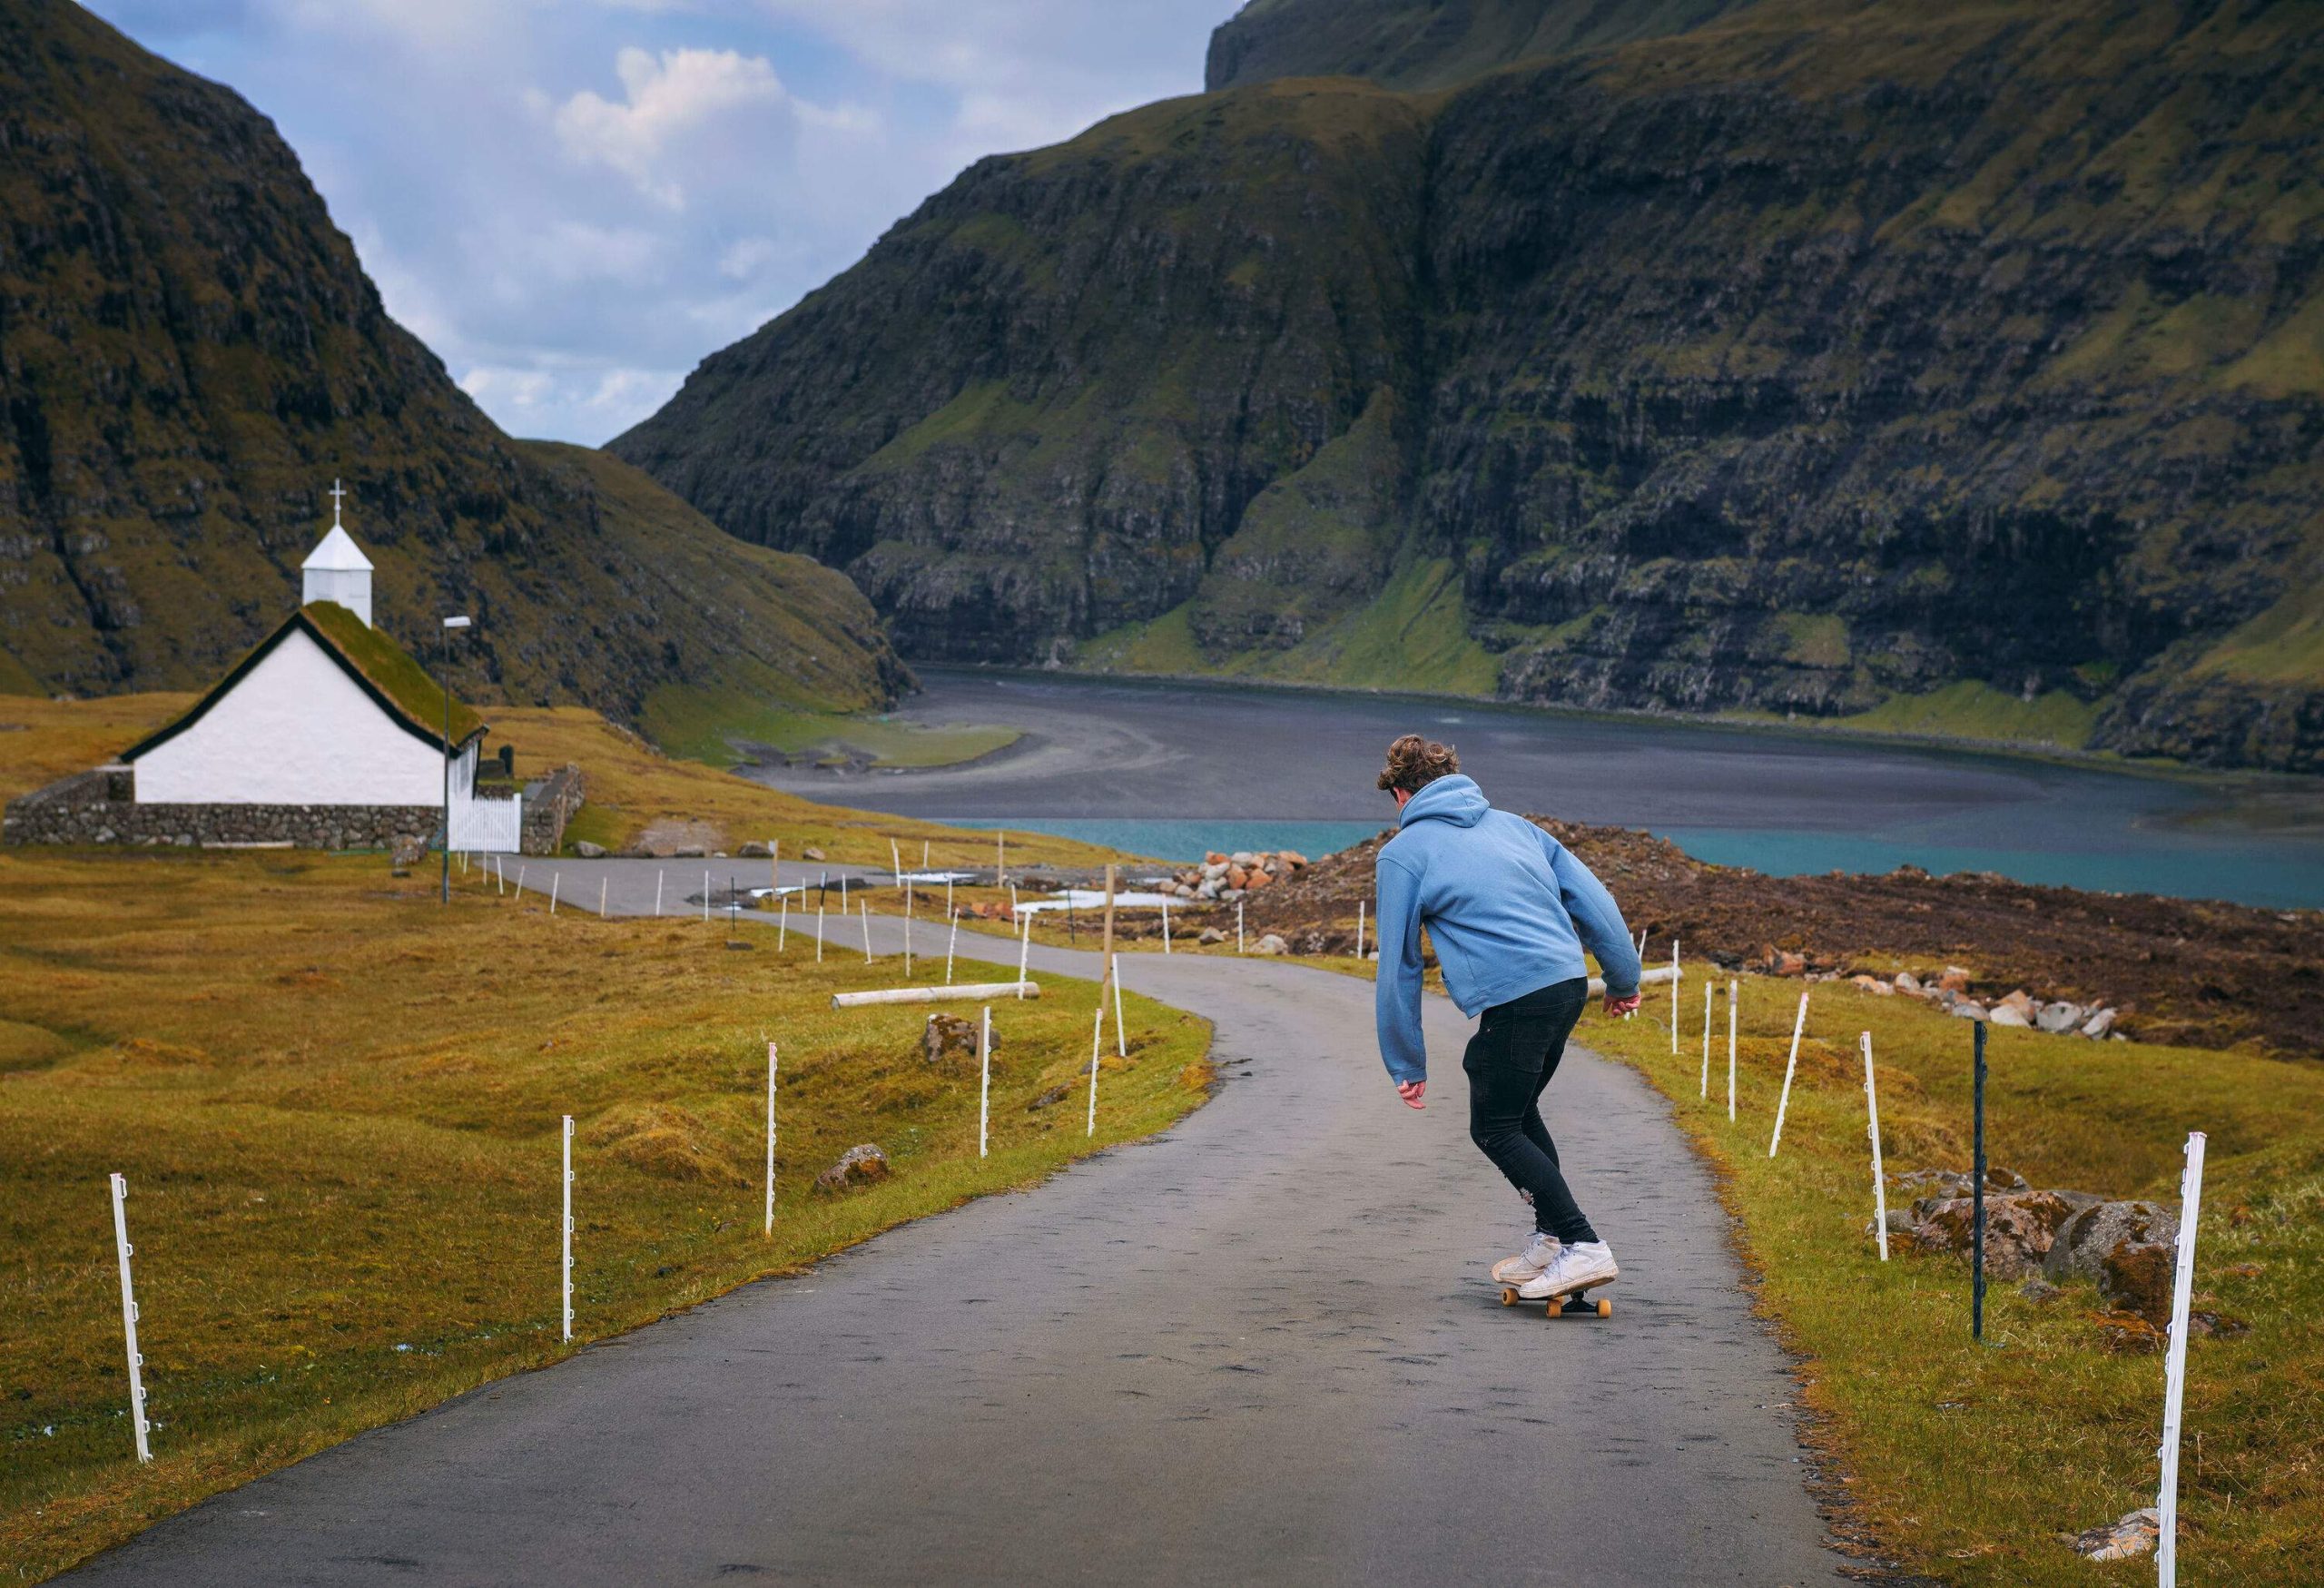 A man in a light blue hoodie rides a skateboard down a winding road towards a white church and calm lake at the base of rugged mountains.